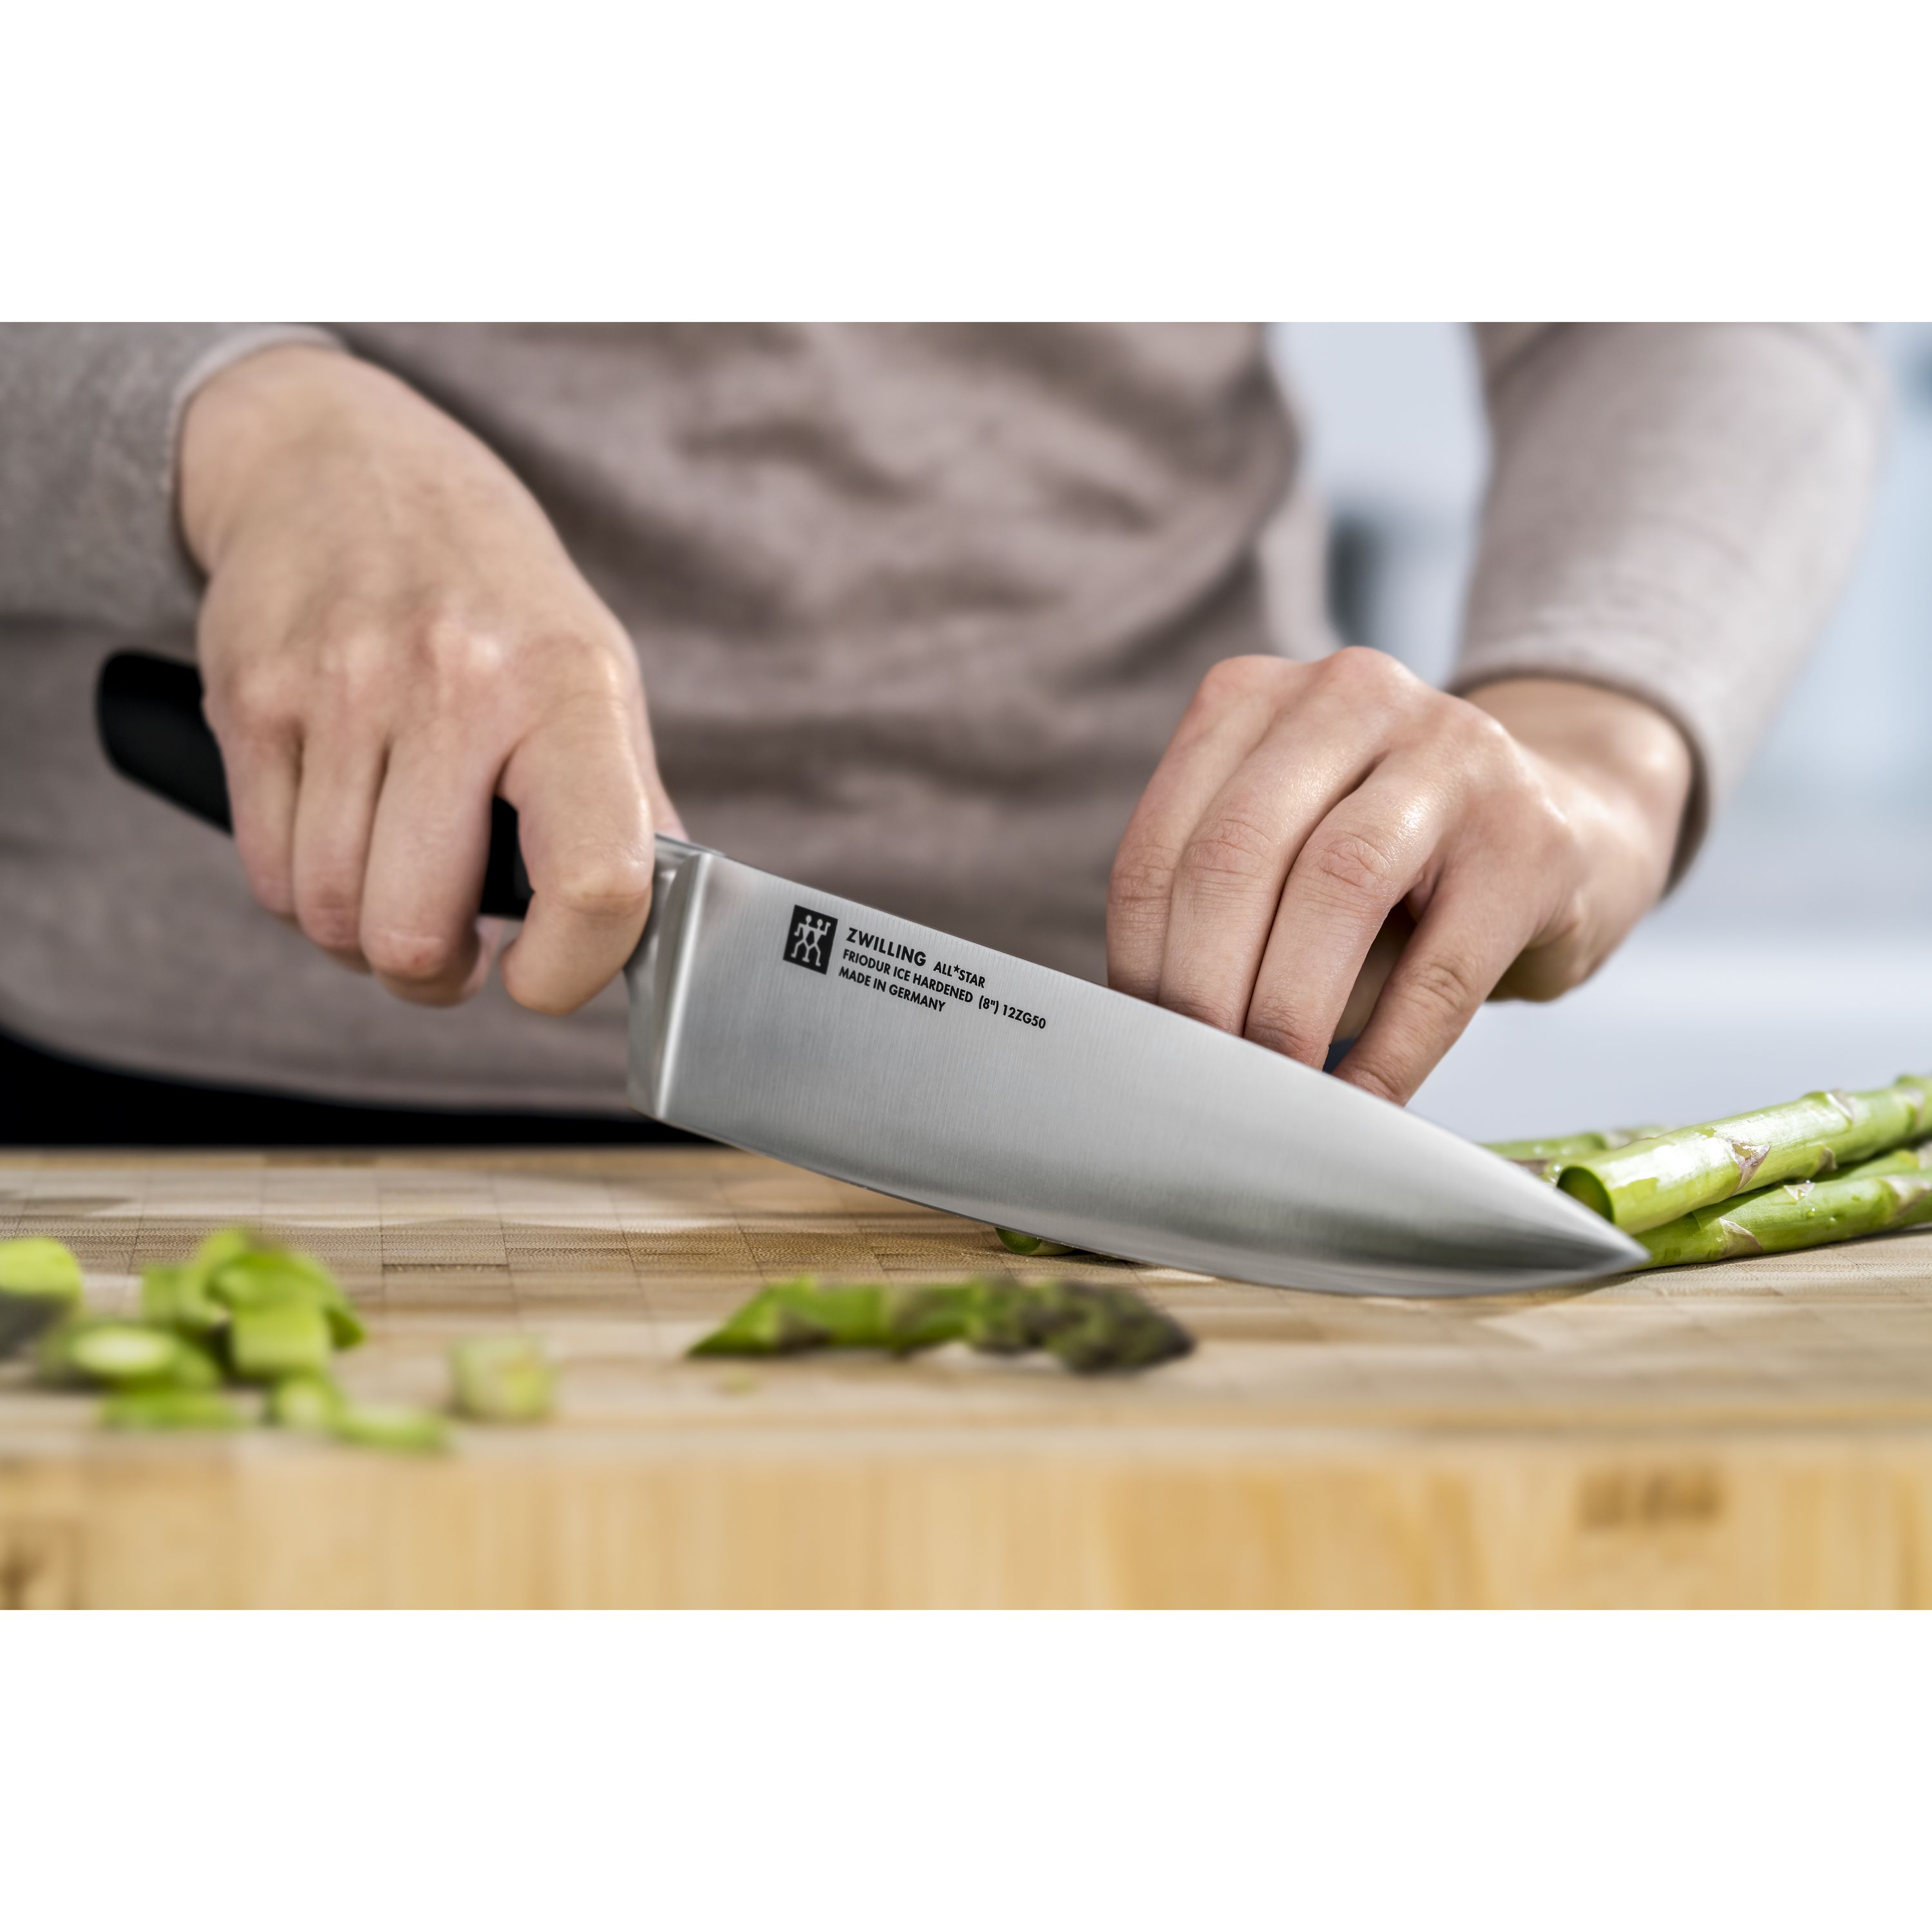 Henckels Classic Precision 6-inch Chef's Knife, 6-inch - Pick 'n Save